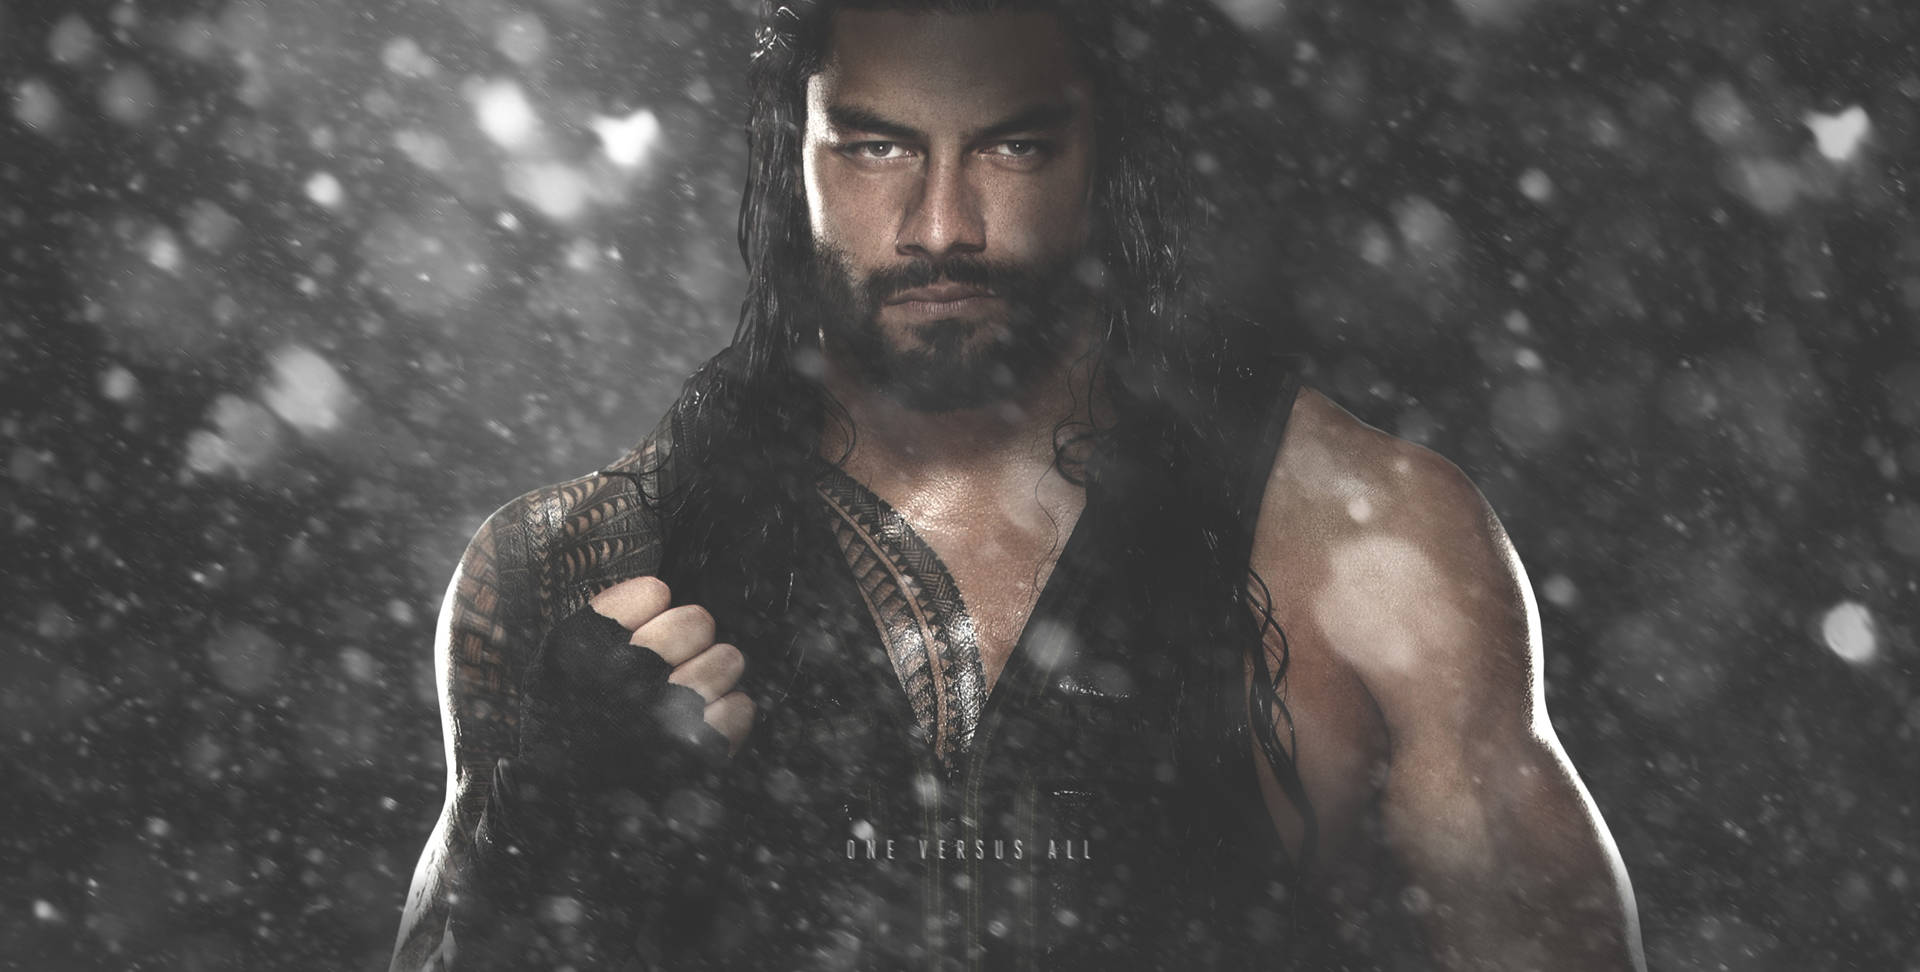 Roman Reigns One Versus All Background